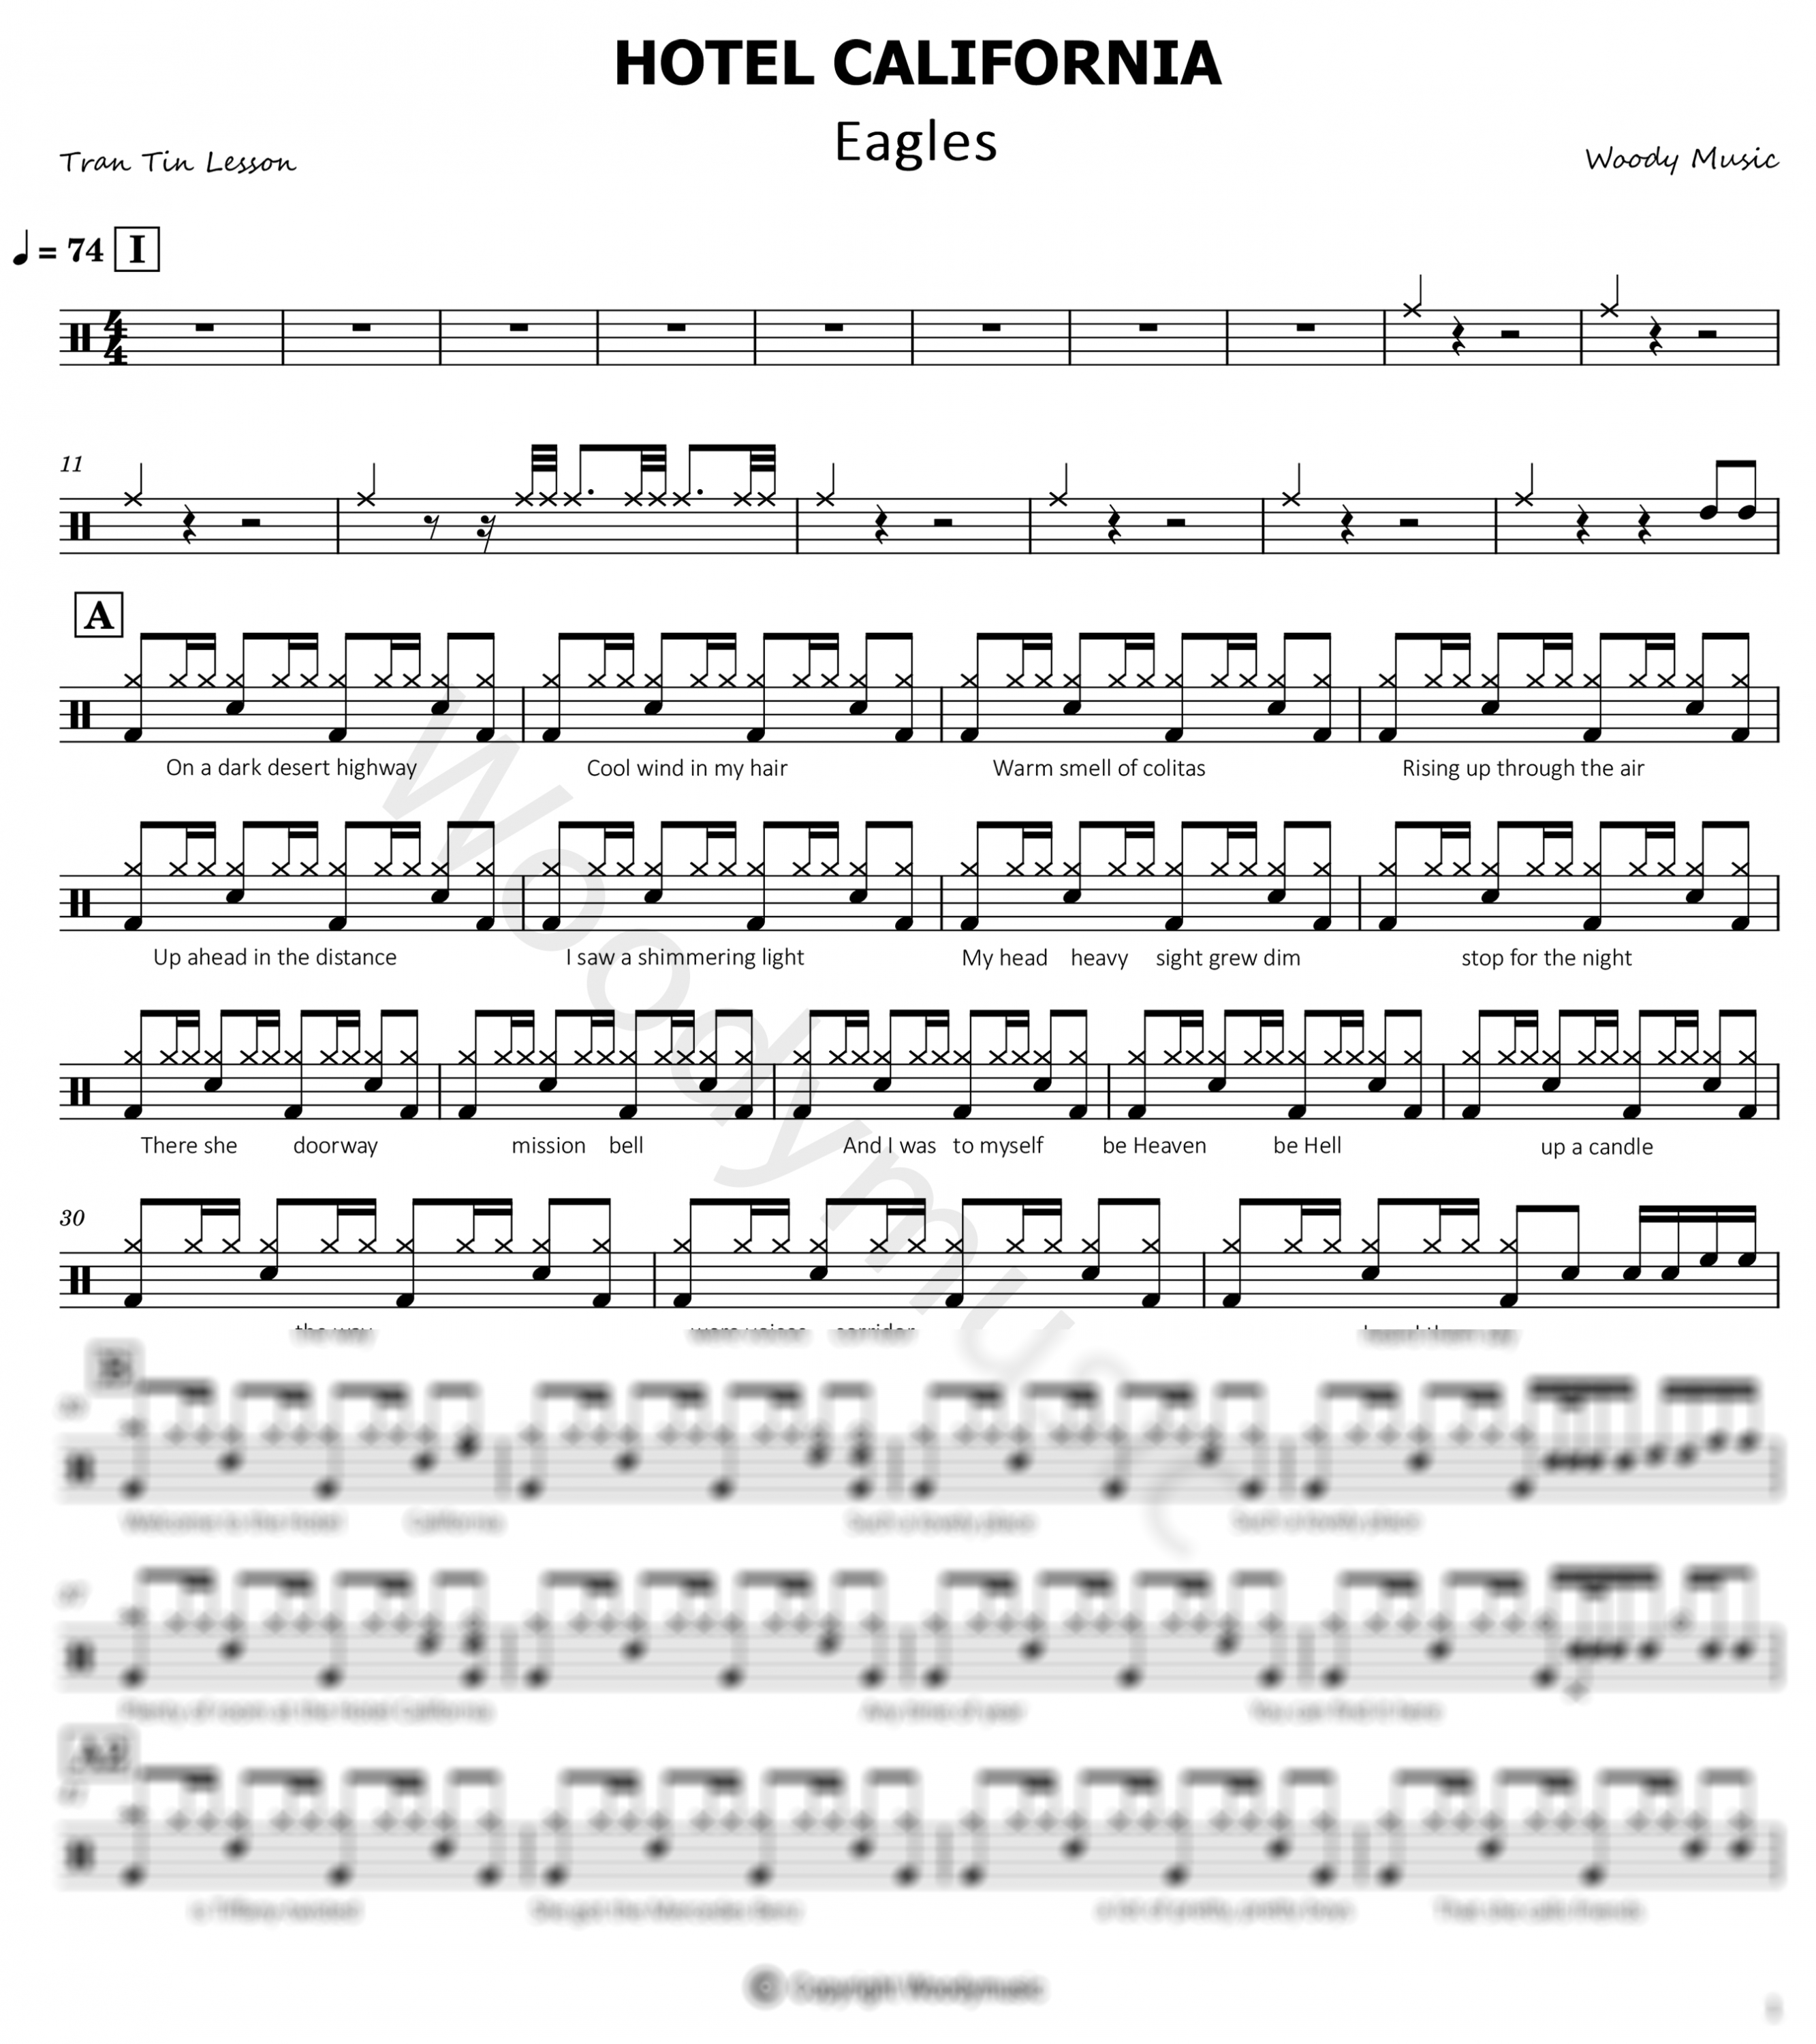 Hotel California - The Eagles (★★★★☆) | Drum Cover, Score, Sheet Music, Lessons, Tutorial